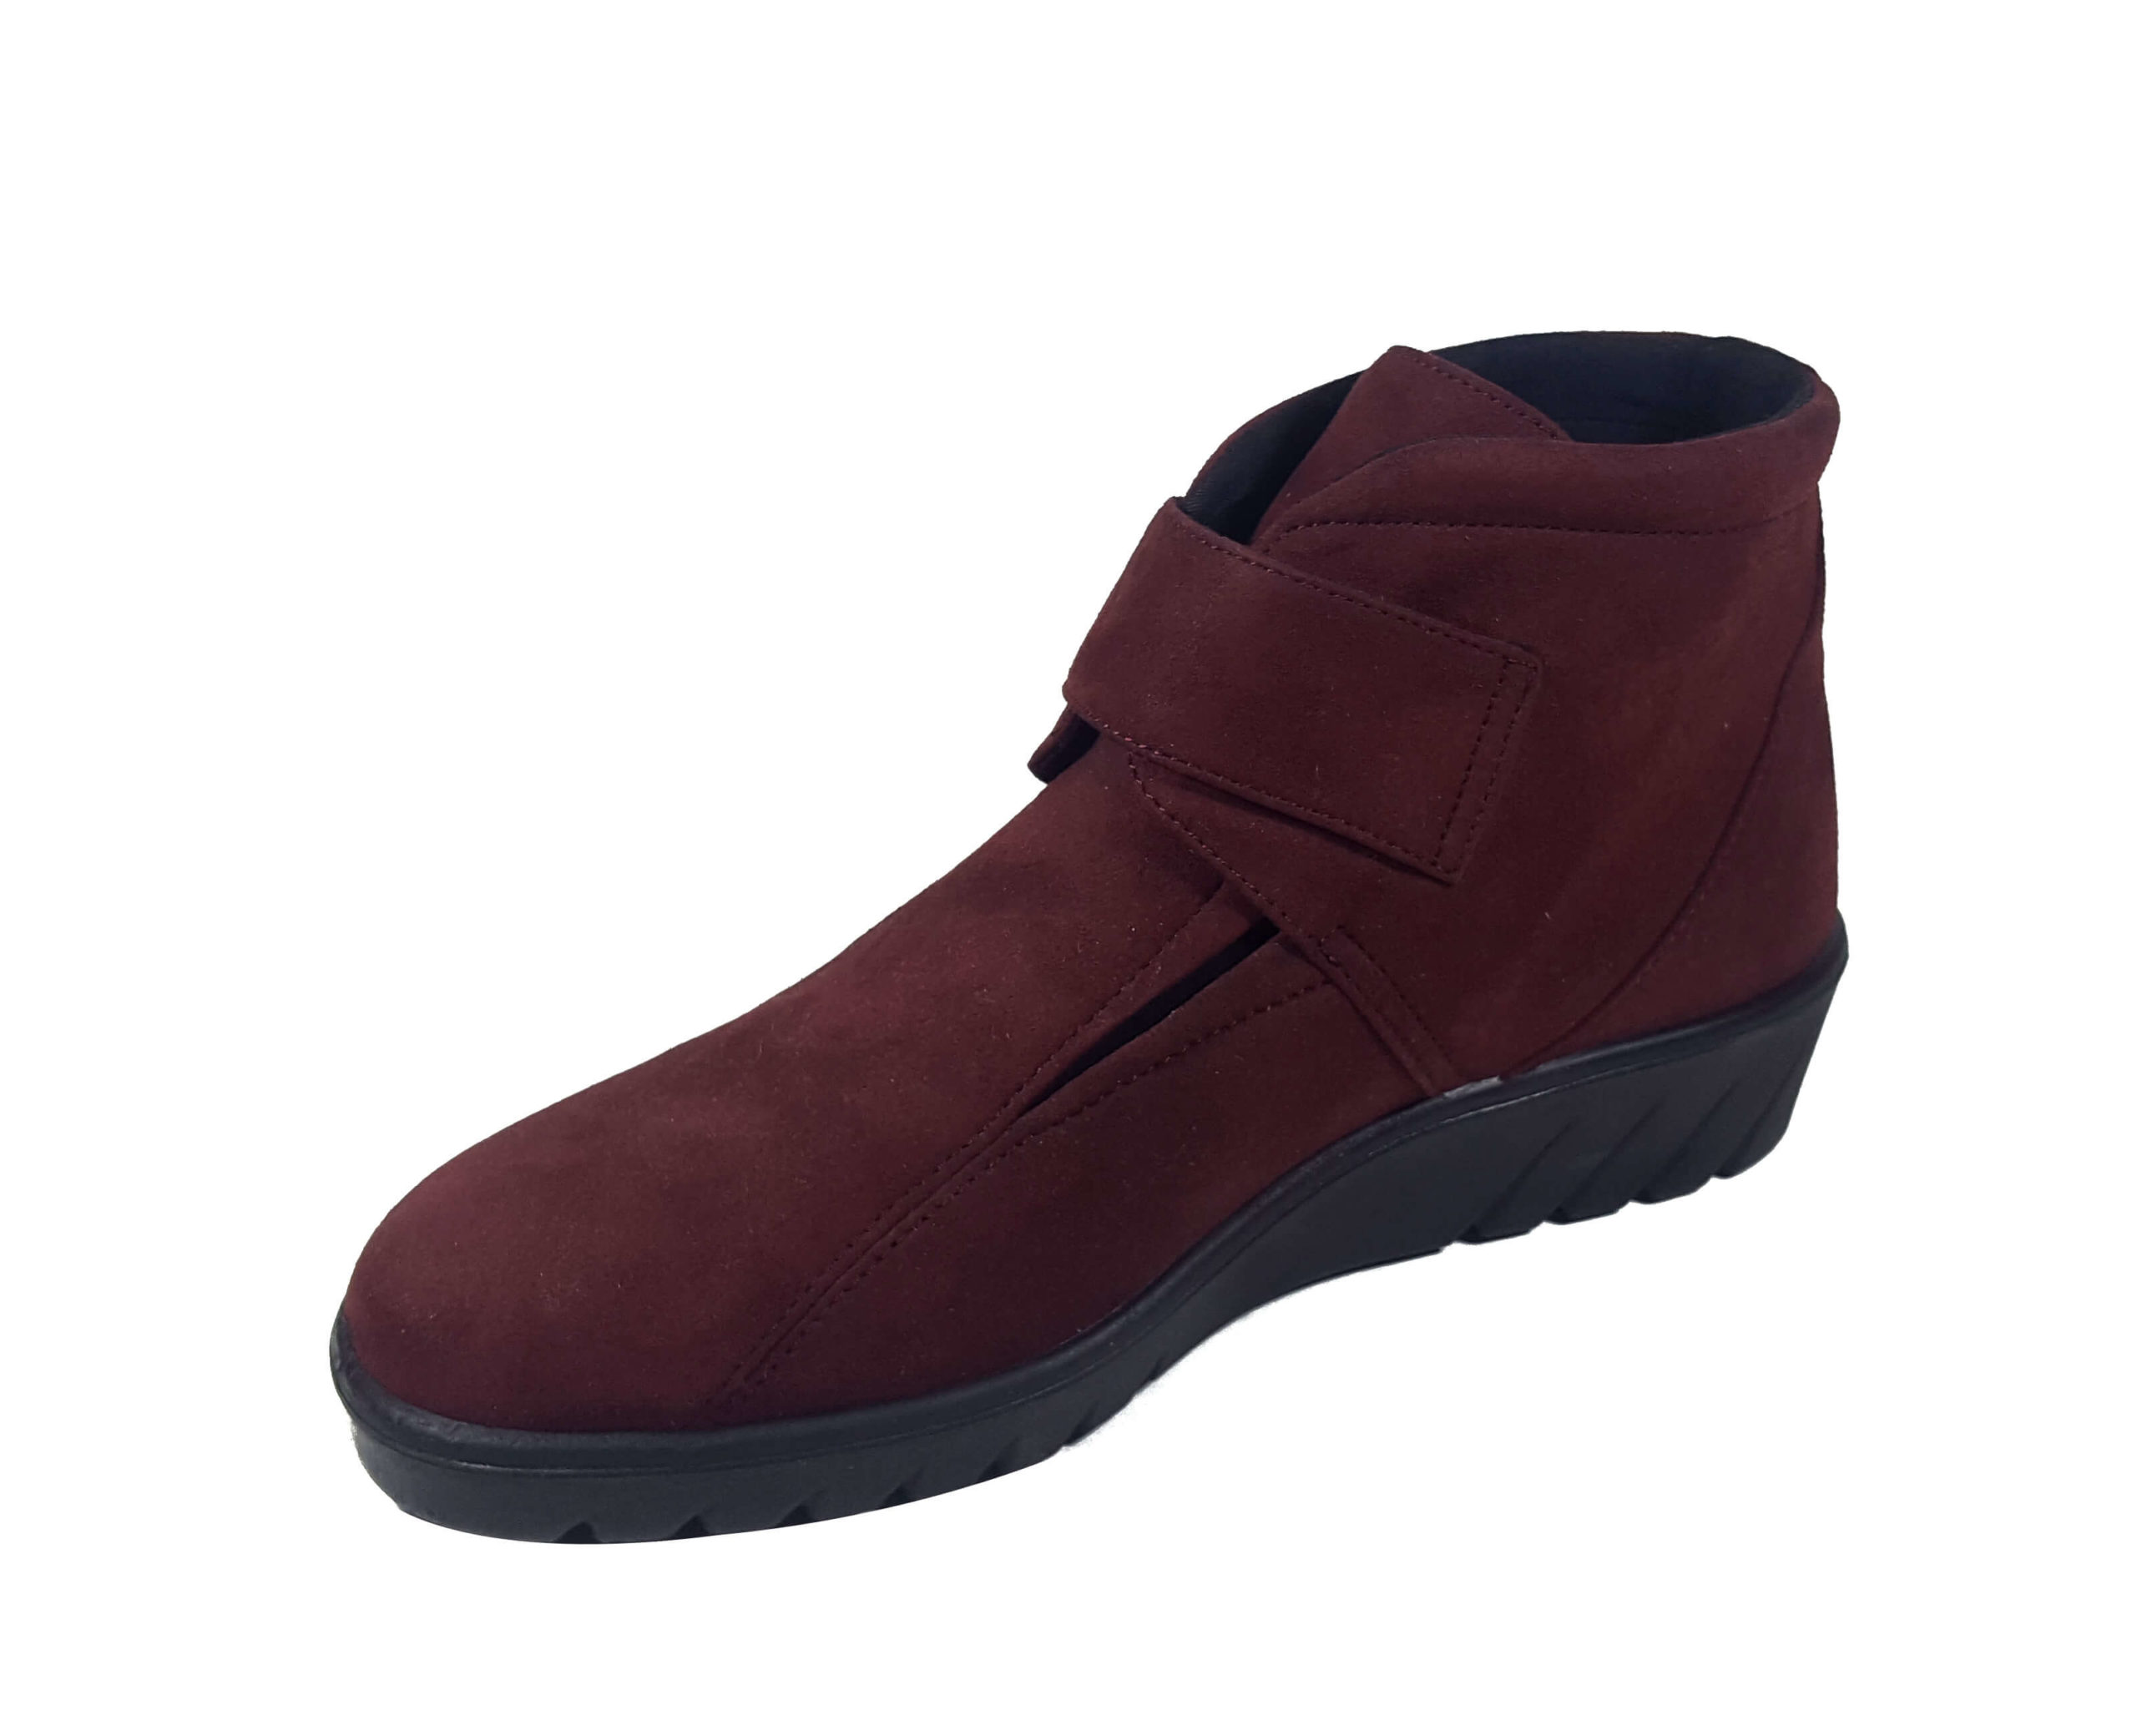 Botines Clarks Mujer Especial Sales Discounts, 46% OFF |